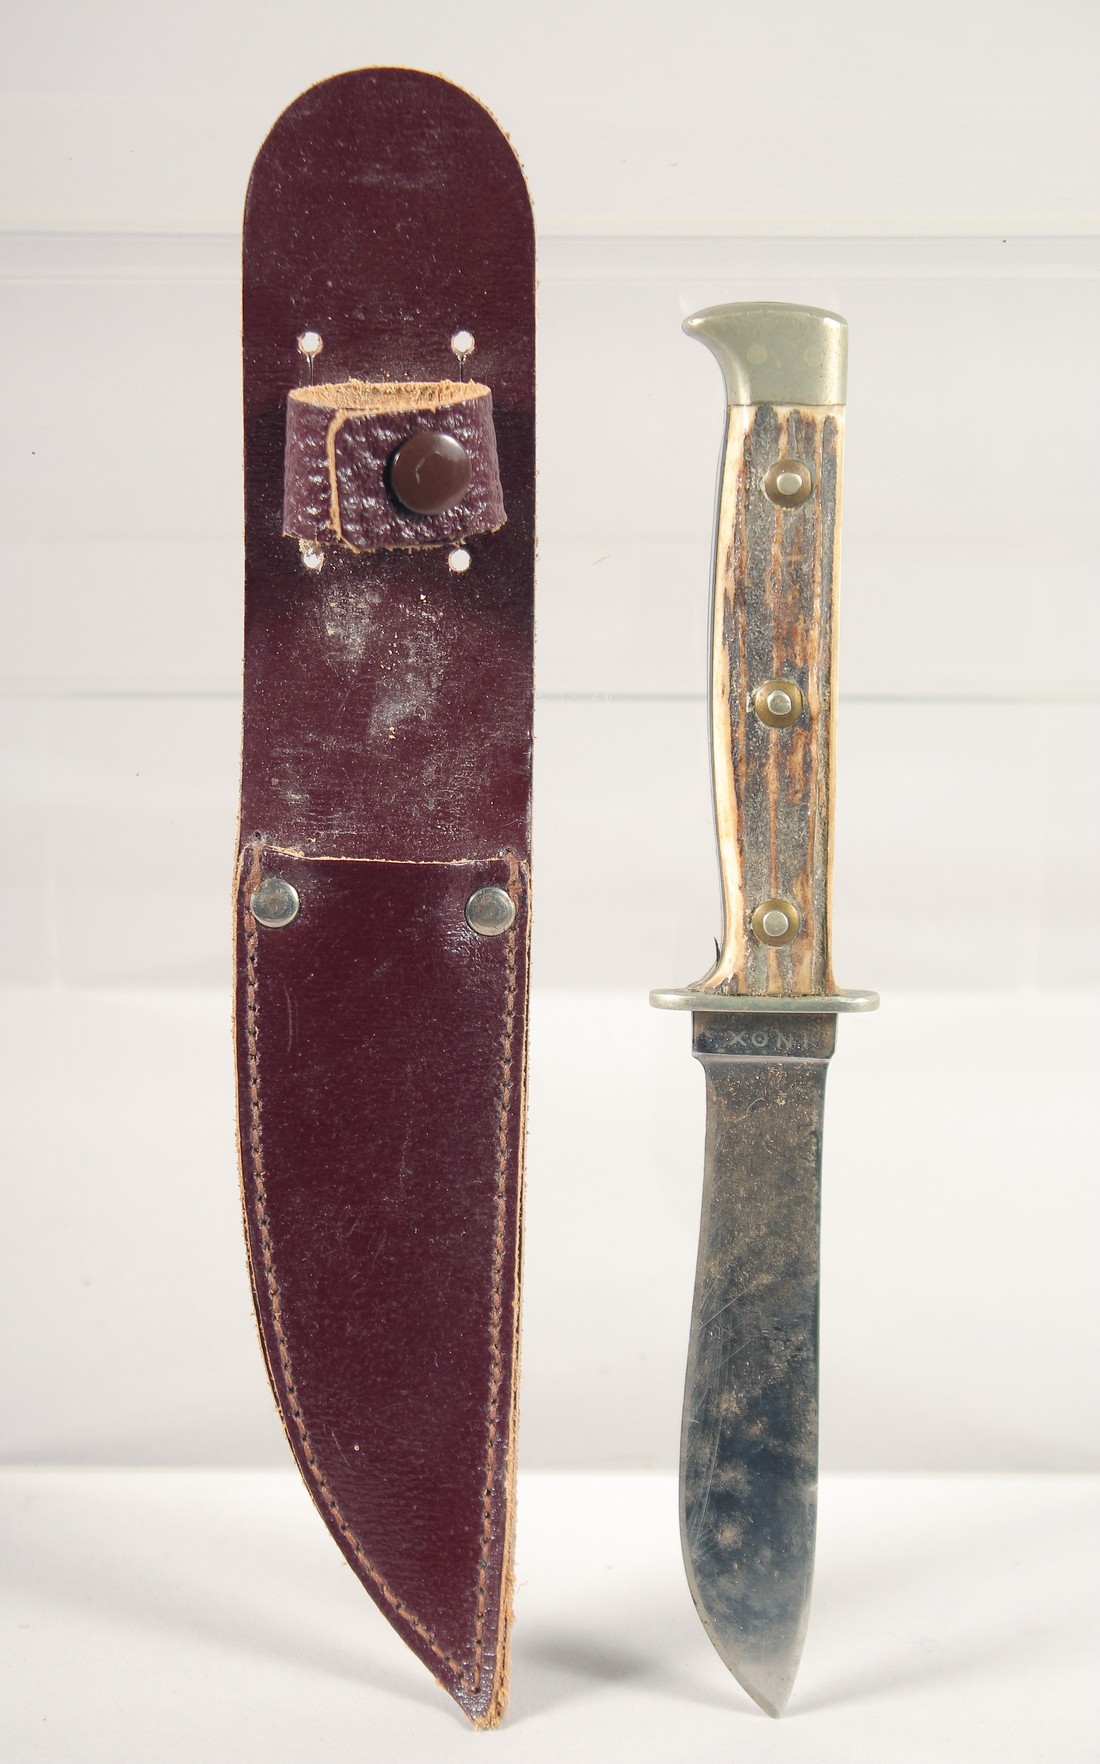 A PUMA NICKER SOLINGEN KNIFE, with antler handle in a leather sheath,7.5" long.